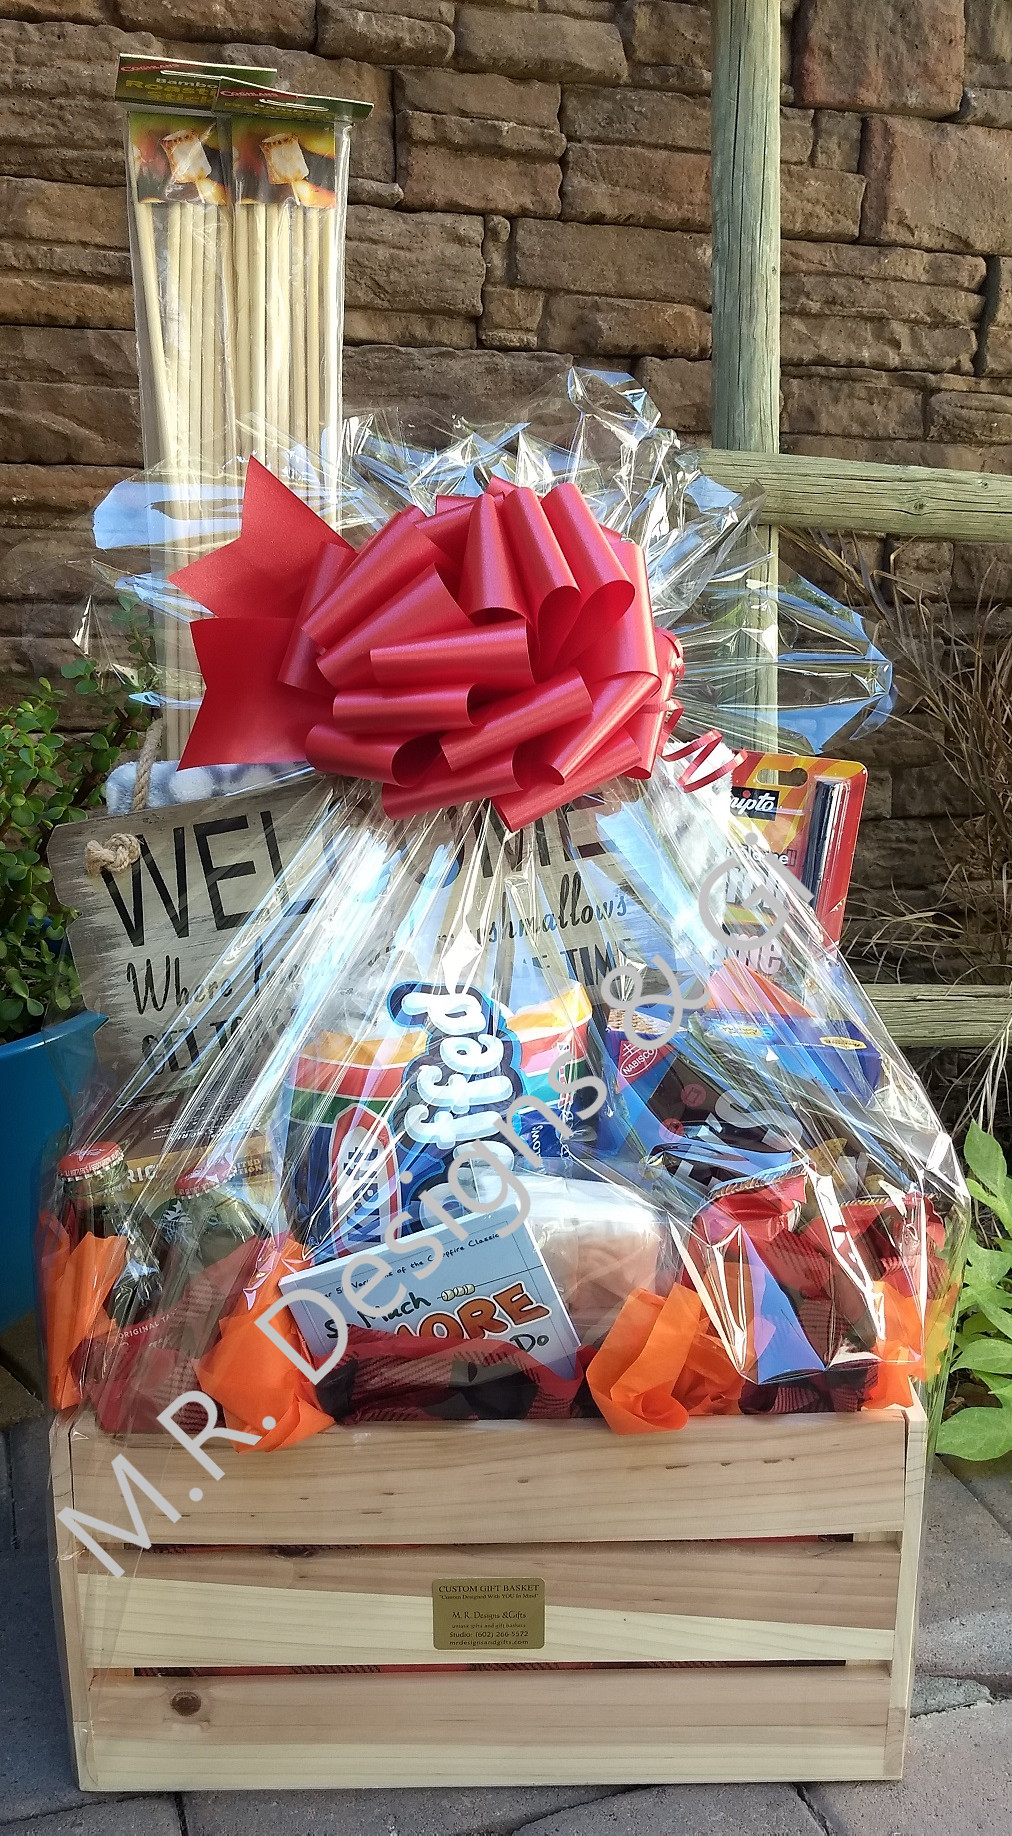 Work Gift Basket Ideas
 Special Event and Silent Auction Gift Basket Ideas by M R